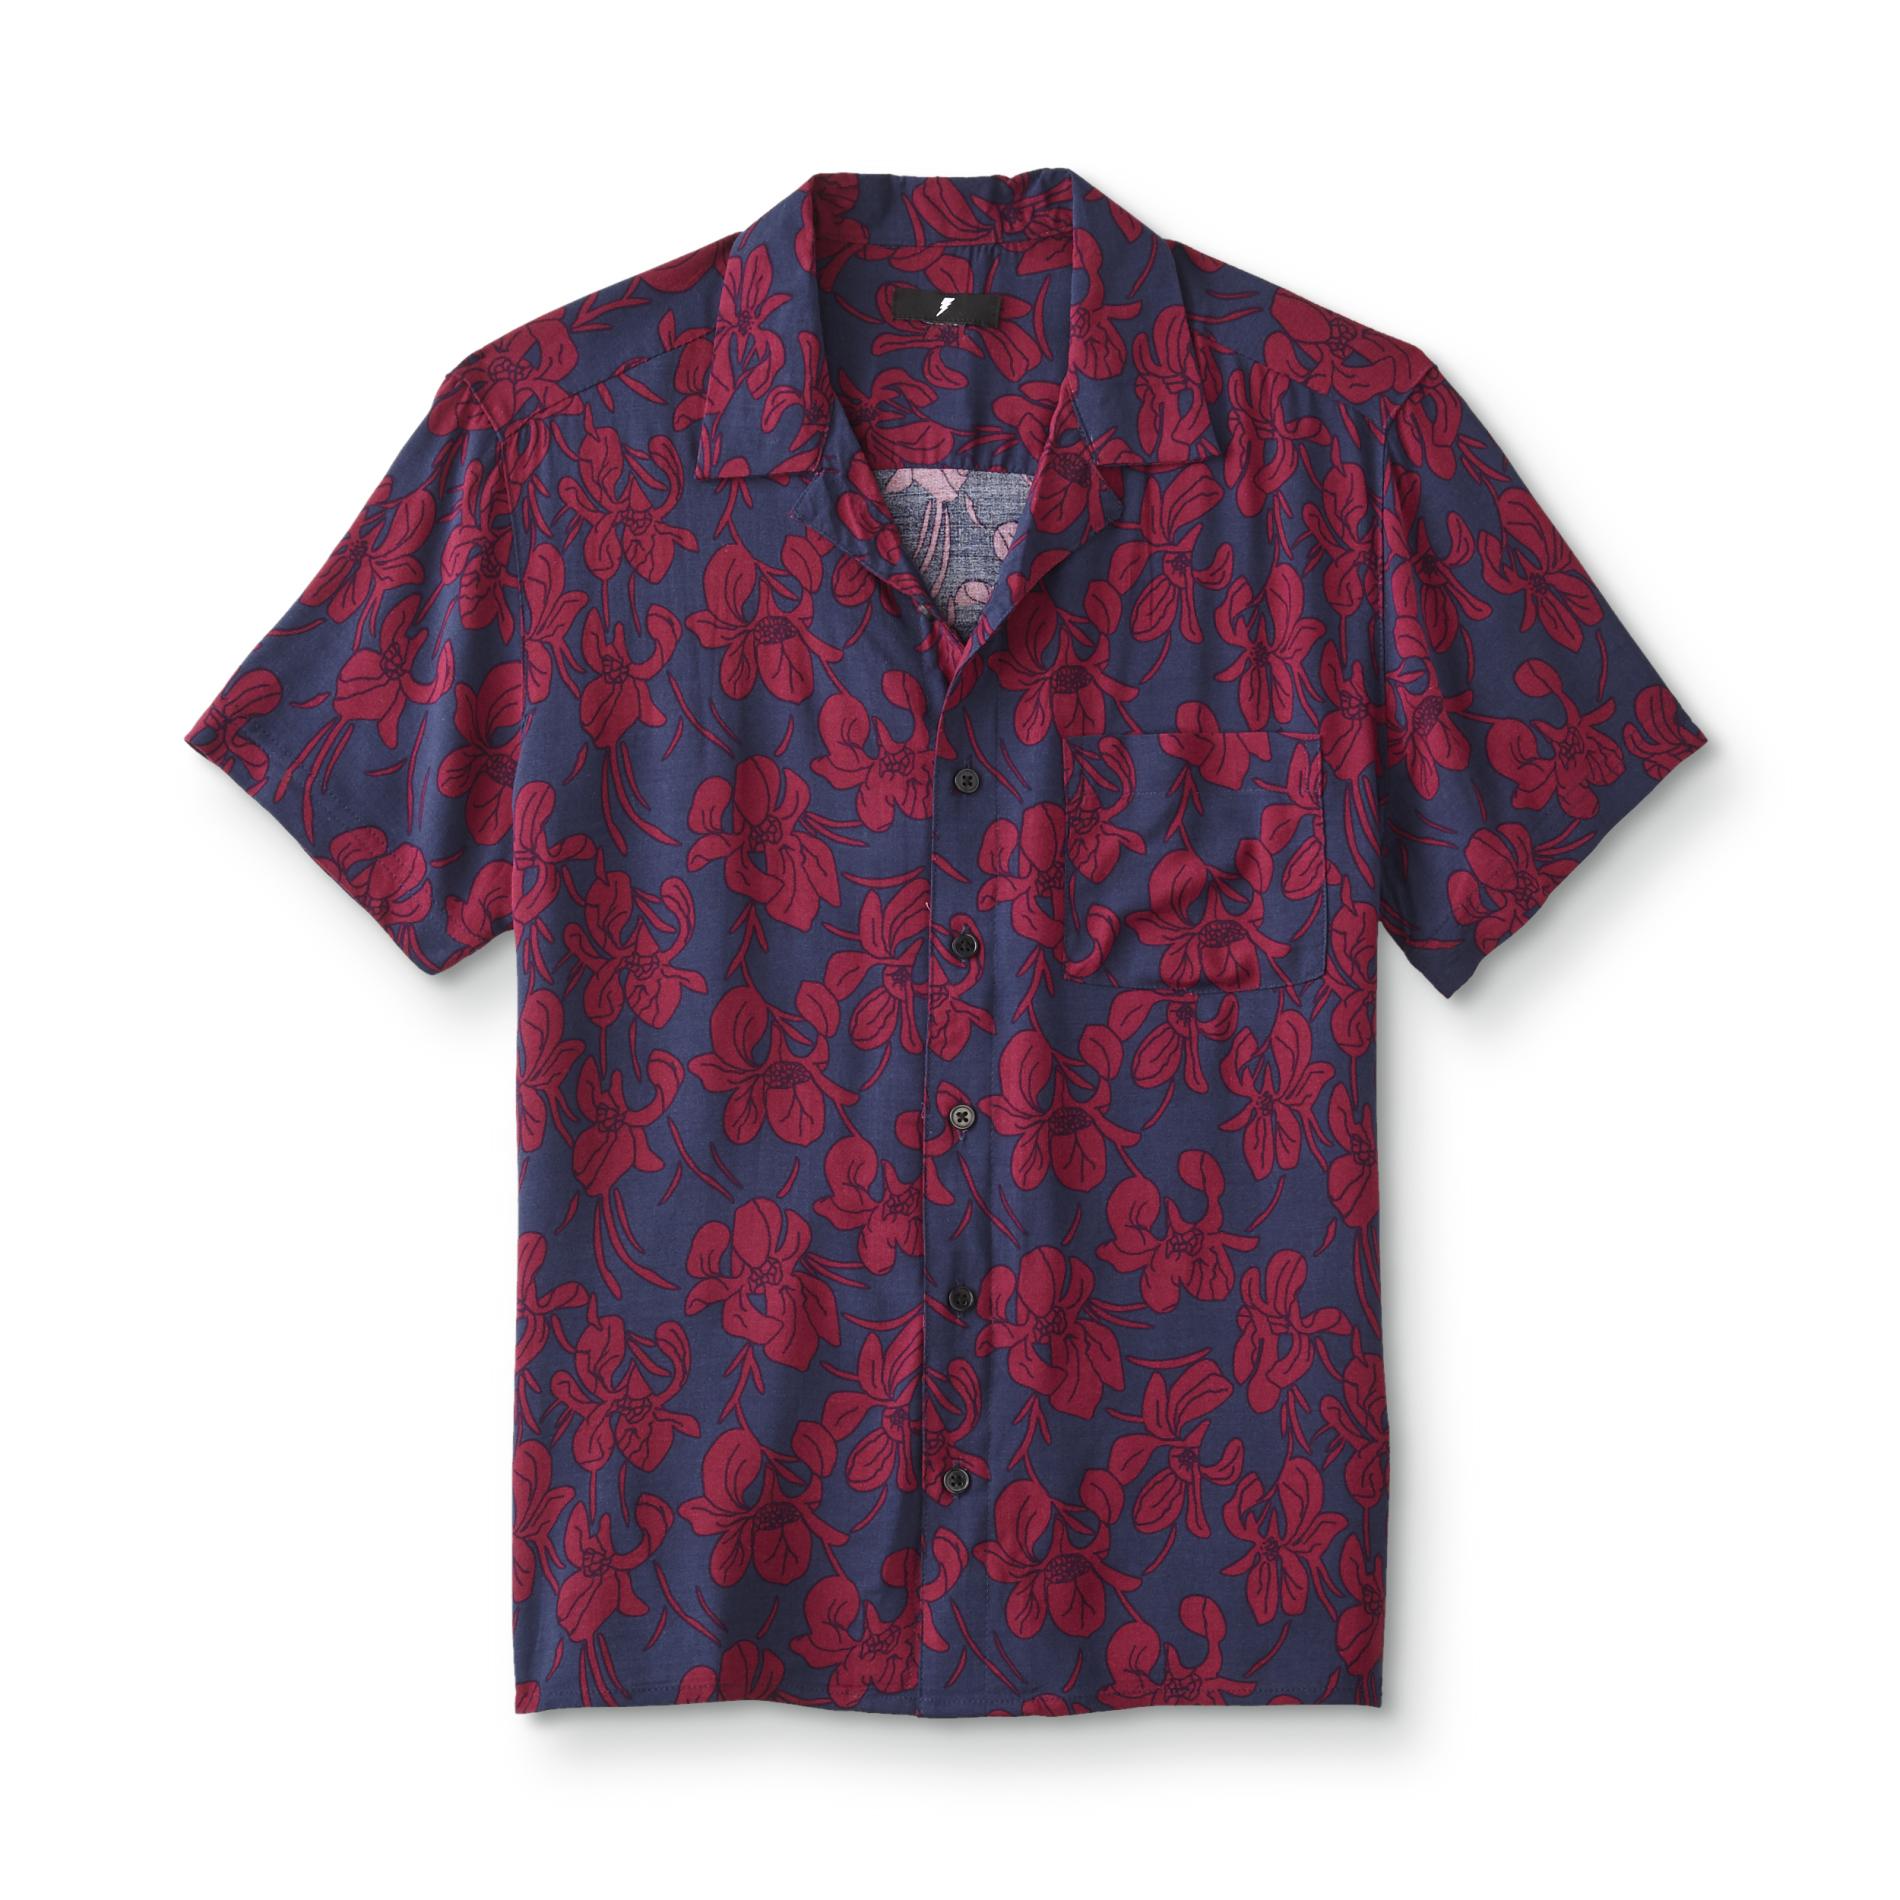 Amplify Young Men's Short-Sleeve Button Front Shirt - Floral